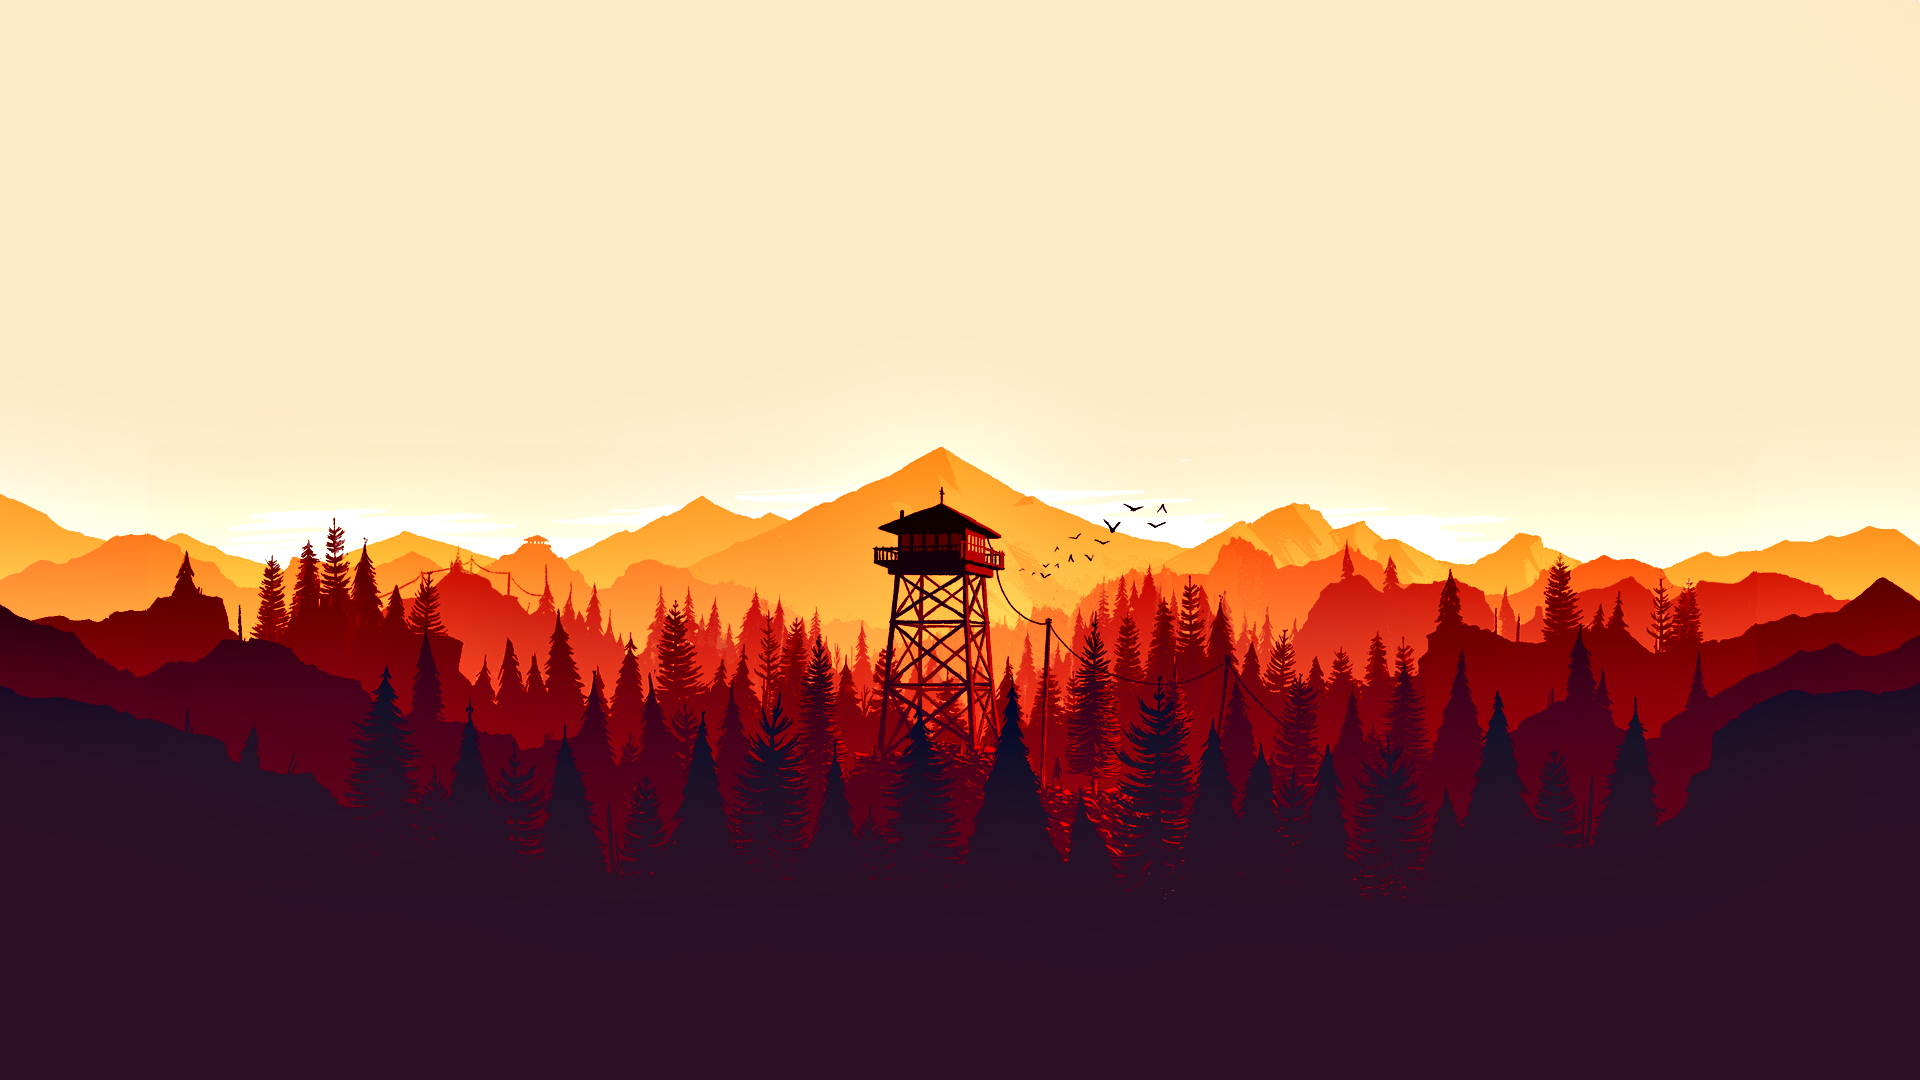 #Firewatch, #video games, #forest, #fire lookout tower, #minimalism, #digital art, #colorful, #landscape, #Olly Moss, #artwork, #illustration, #tower, #nature, #mountains, #low poly wallpaper. Mocah HD Wallpaper